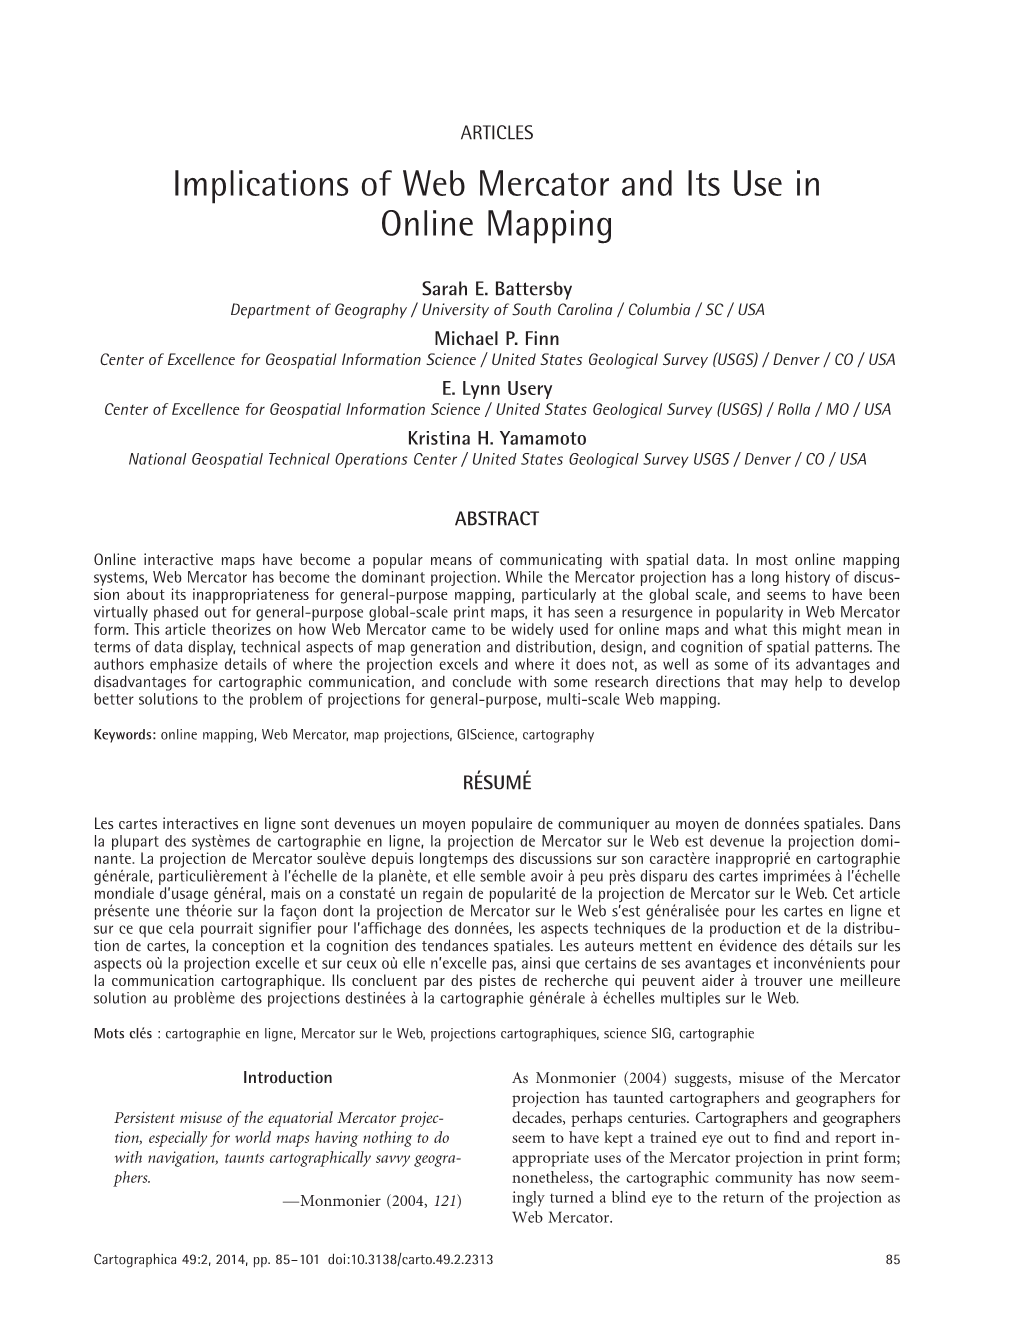 Implications of Web Mercator and Its Use in Online Mapping